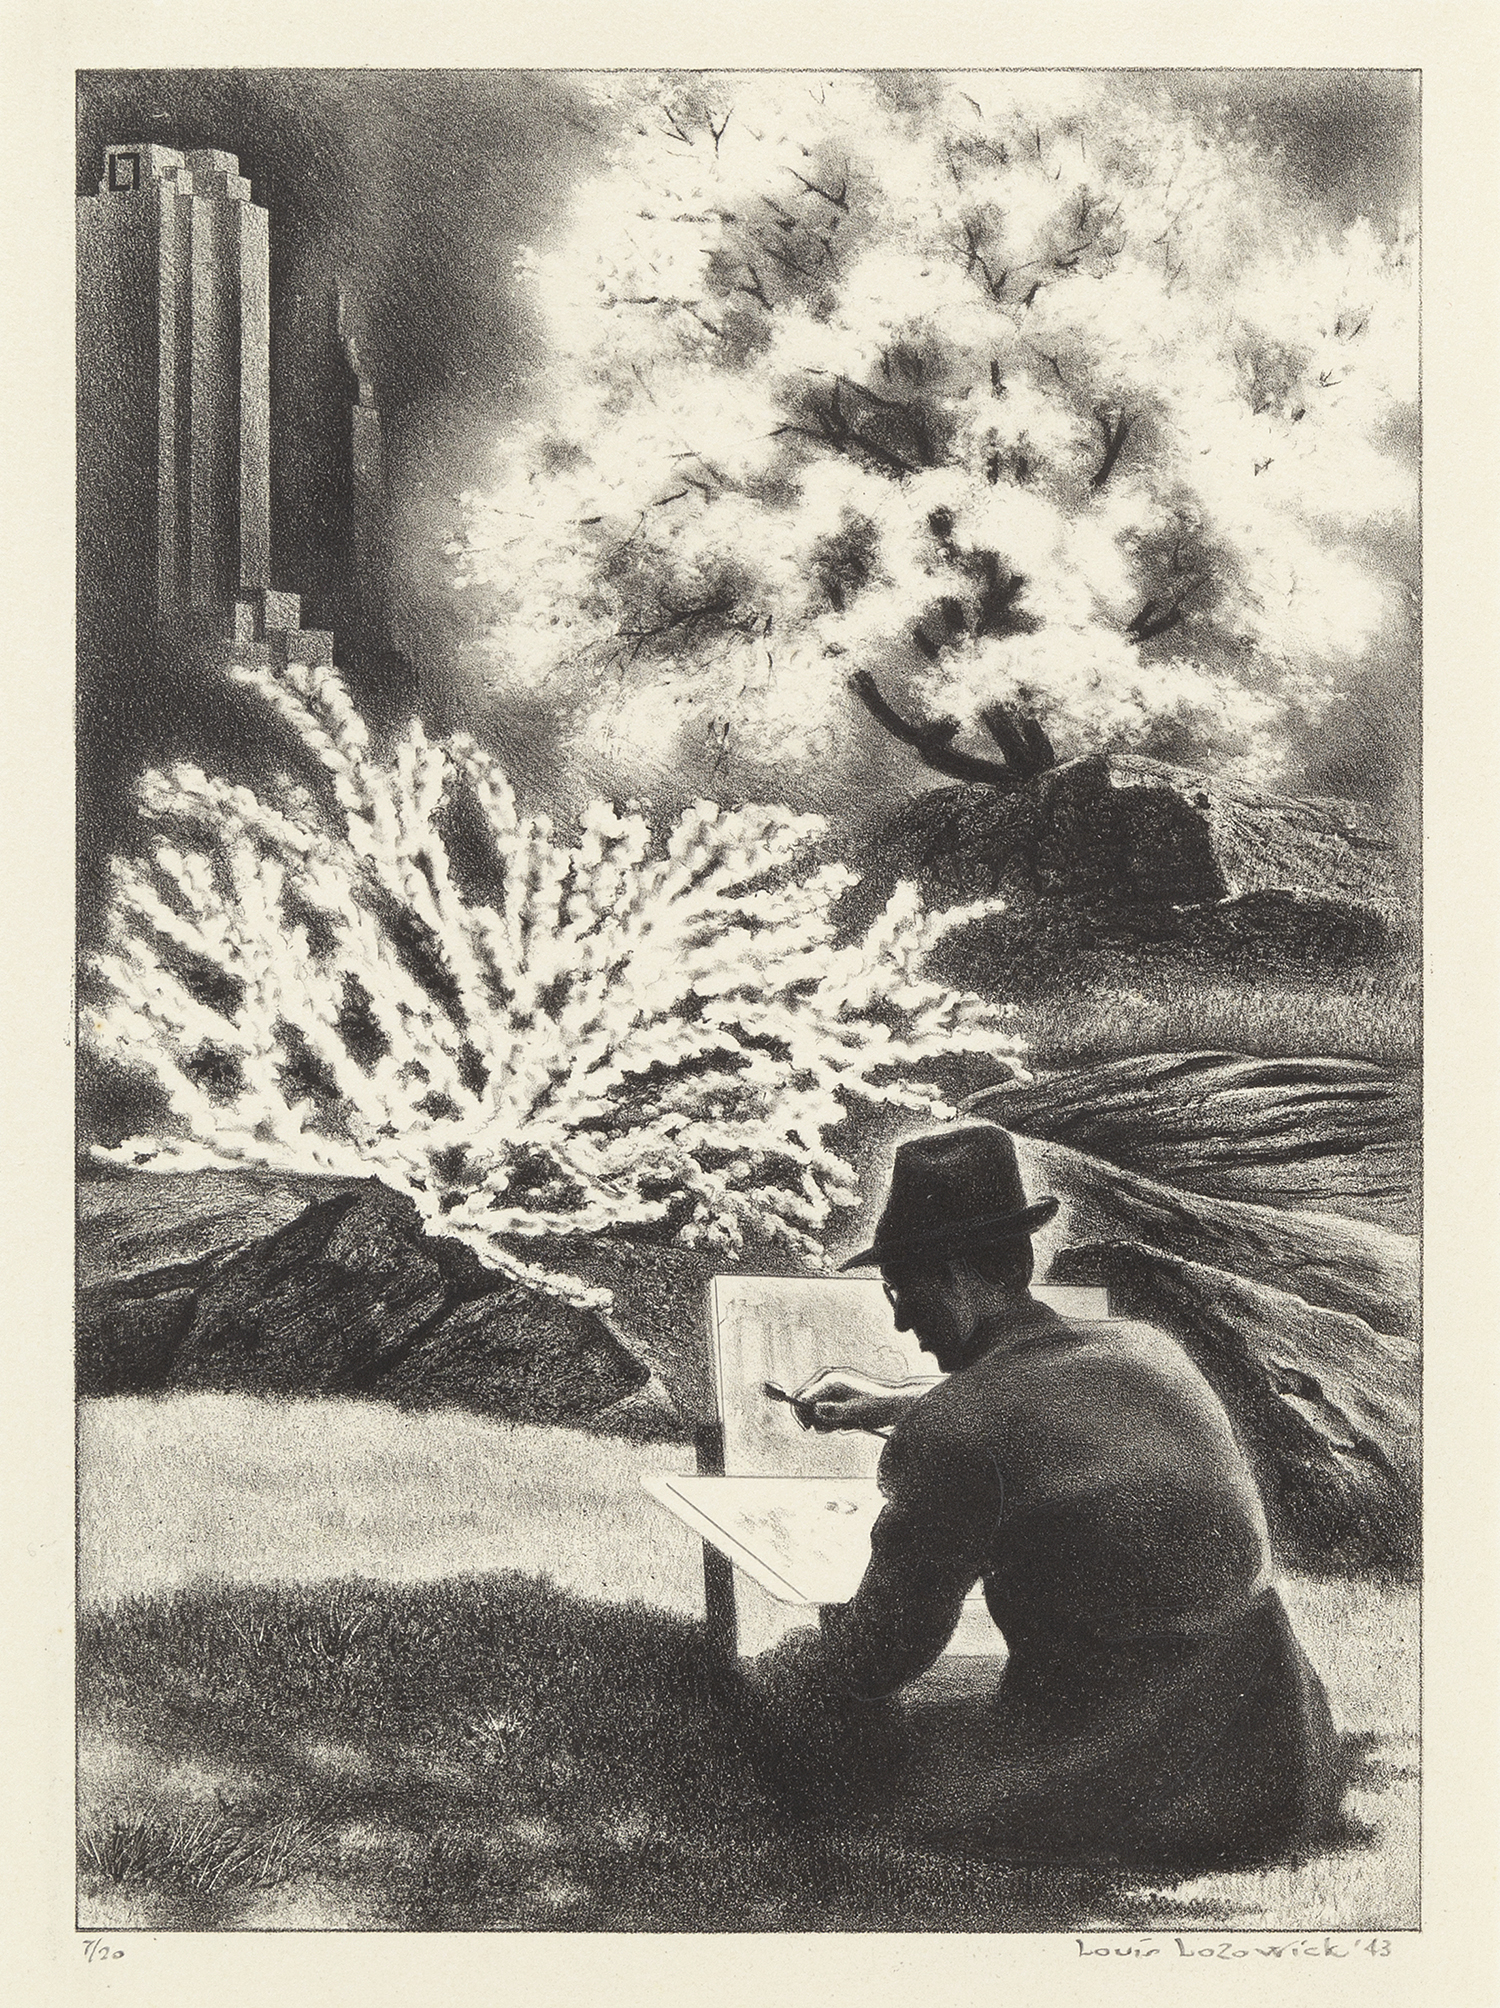 Self-Portrait in Spring, 1943, Lithograph, 11 x 8 inches (27.9 x 20.3 cm), Edition of 20